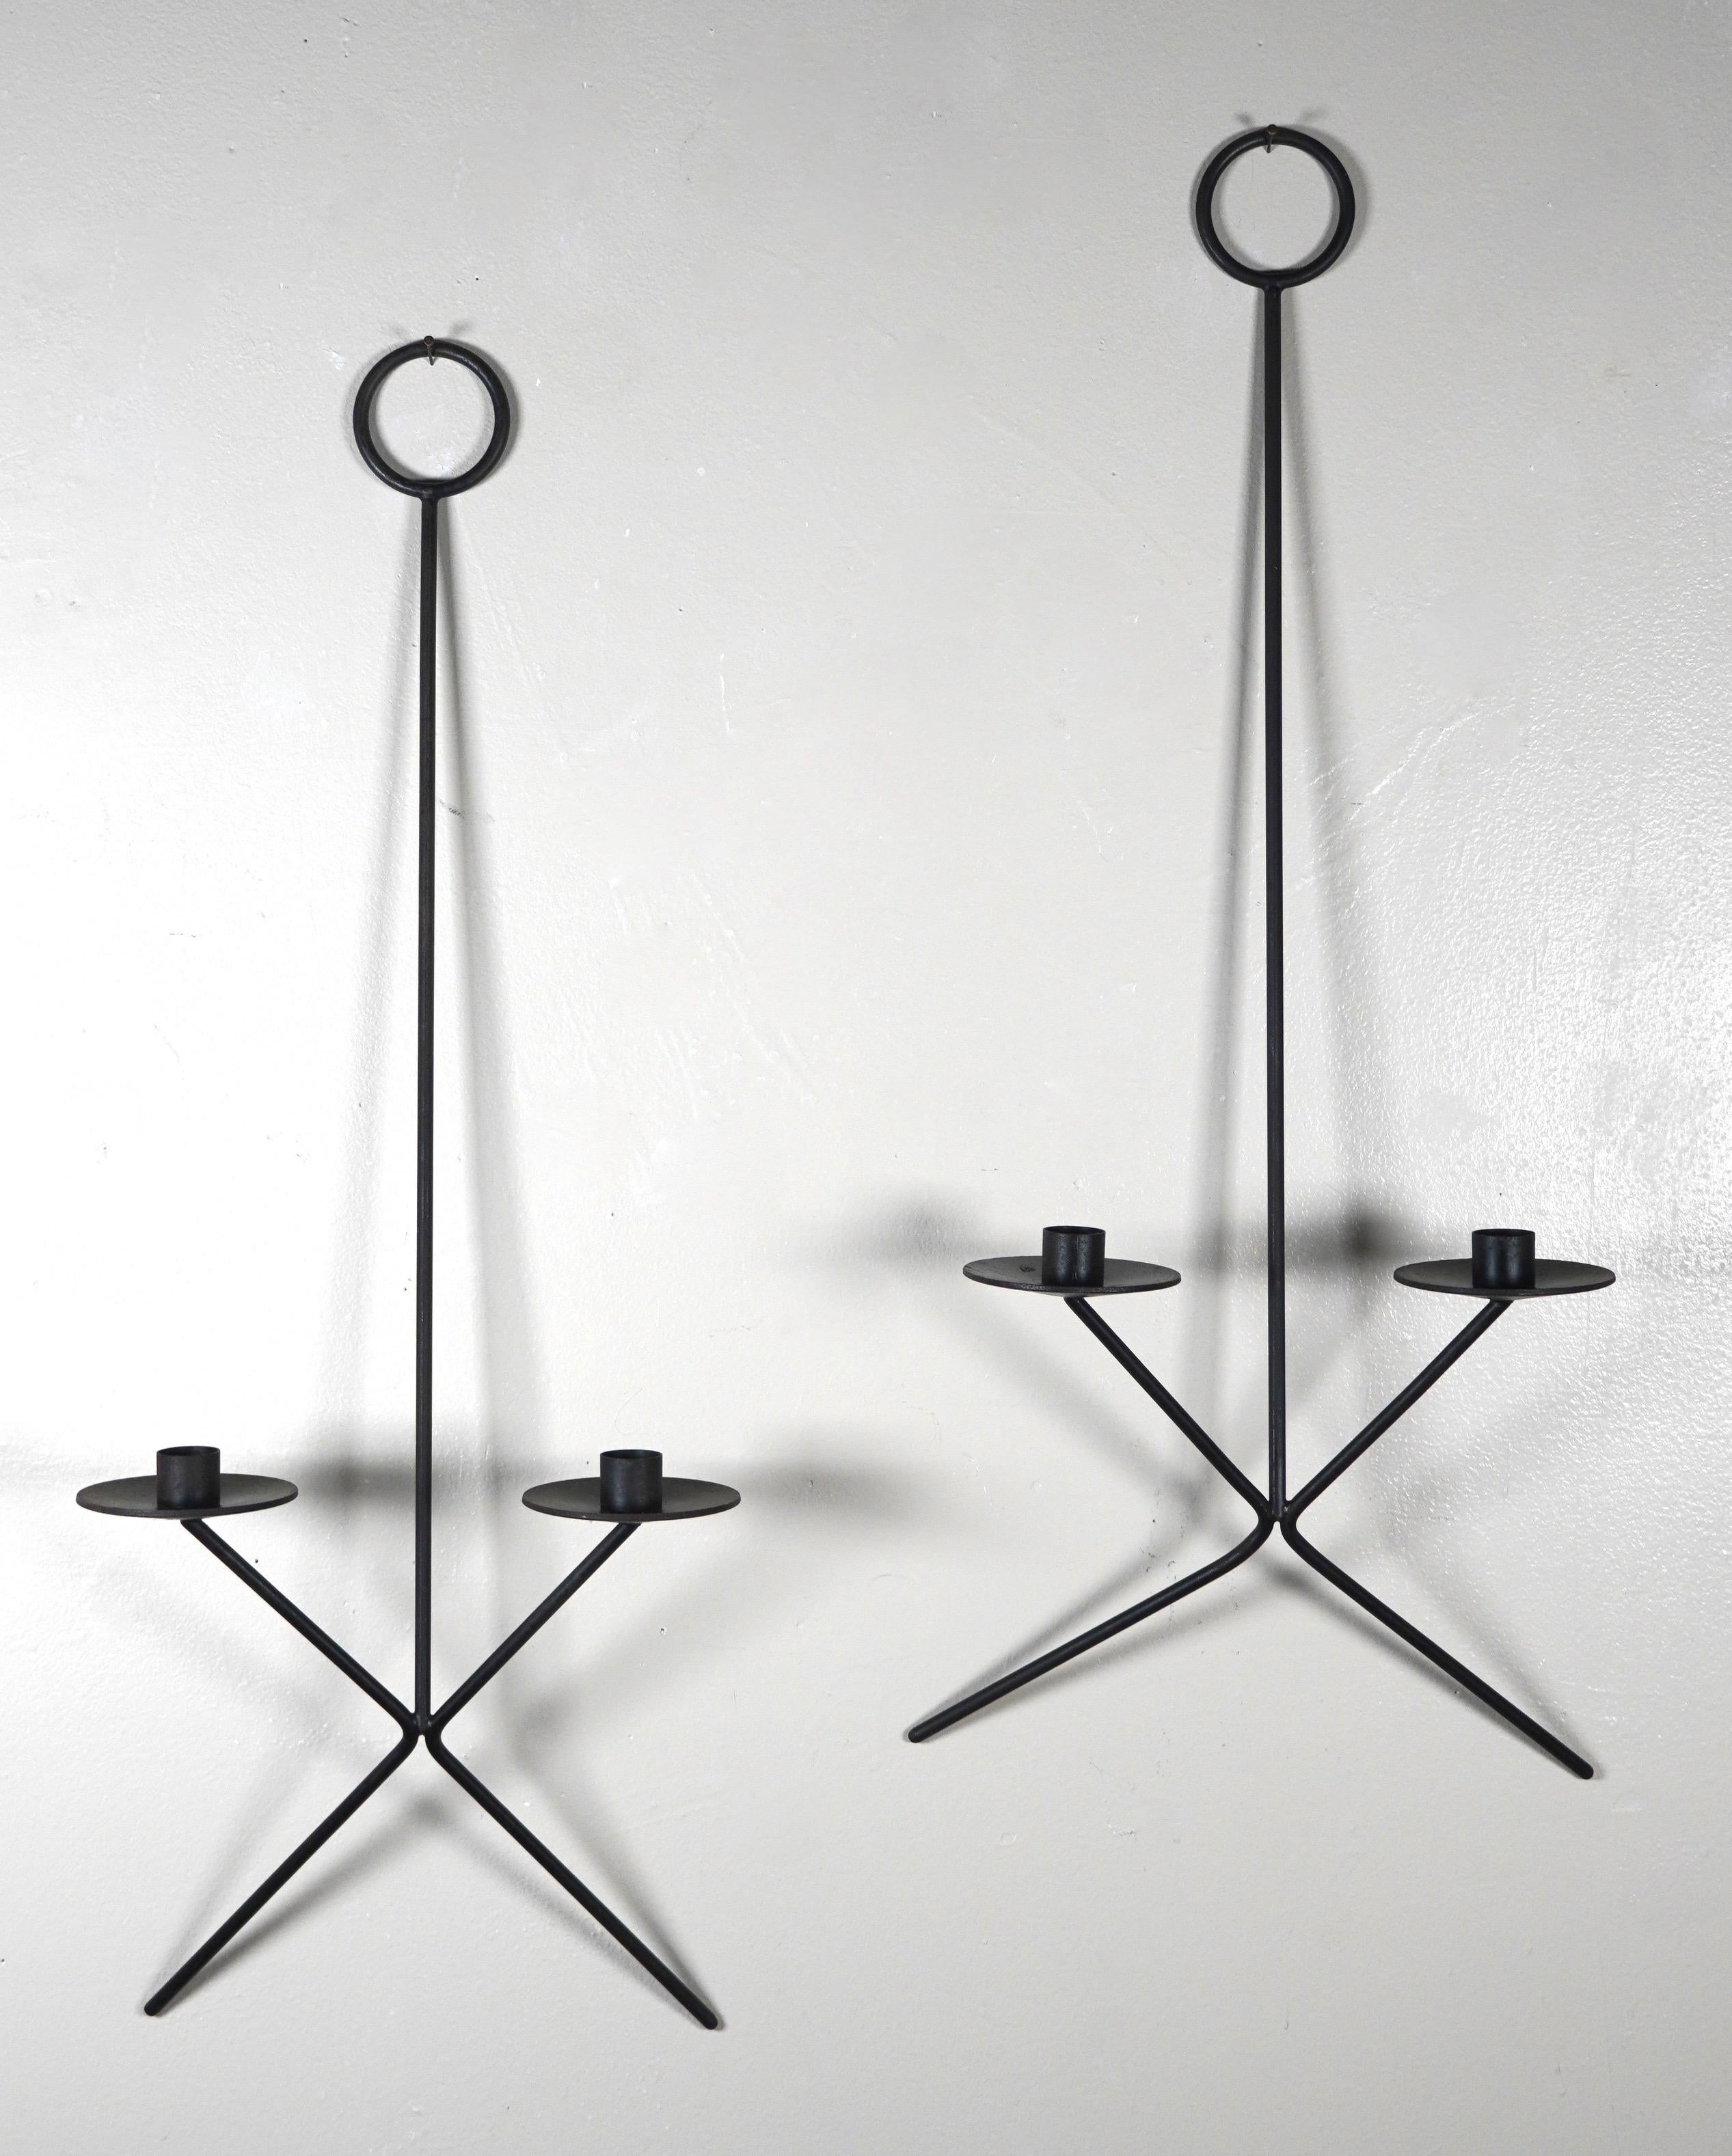 1950s Modernist hanging candle holders / sconces, a very clean and architectural design that looks great with or without candles. A striking design on a open wall either inside or out. Constructed of welded steel painted black.